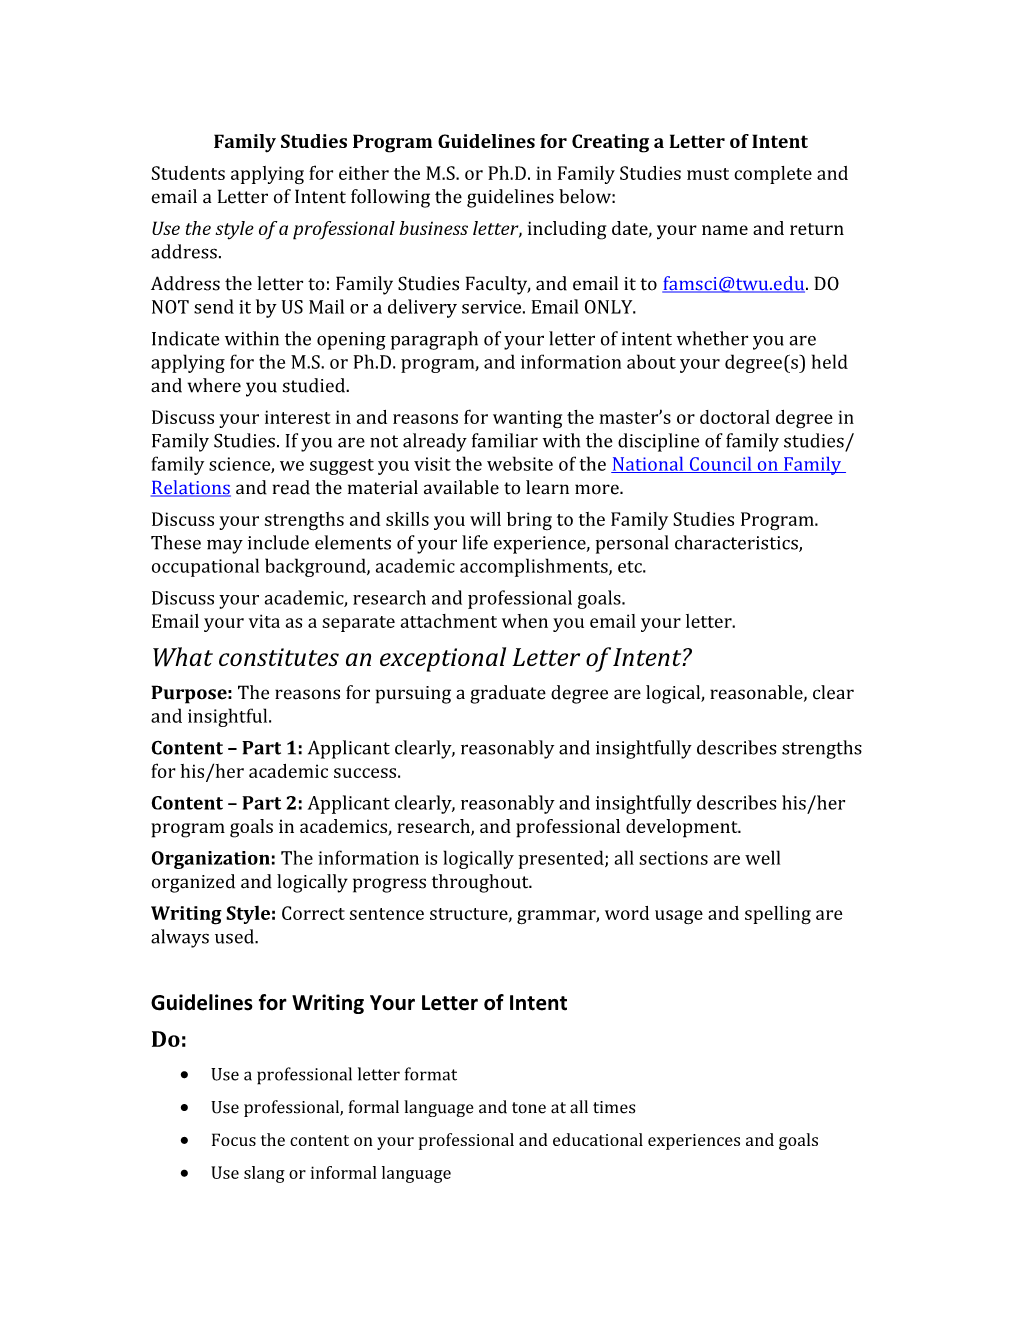 Family Studies Program Guidelines for Creating a Letter of Intent